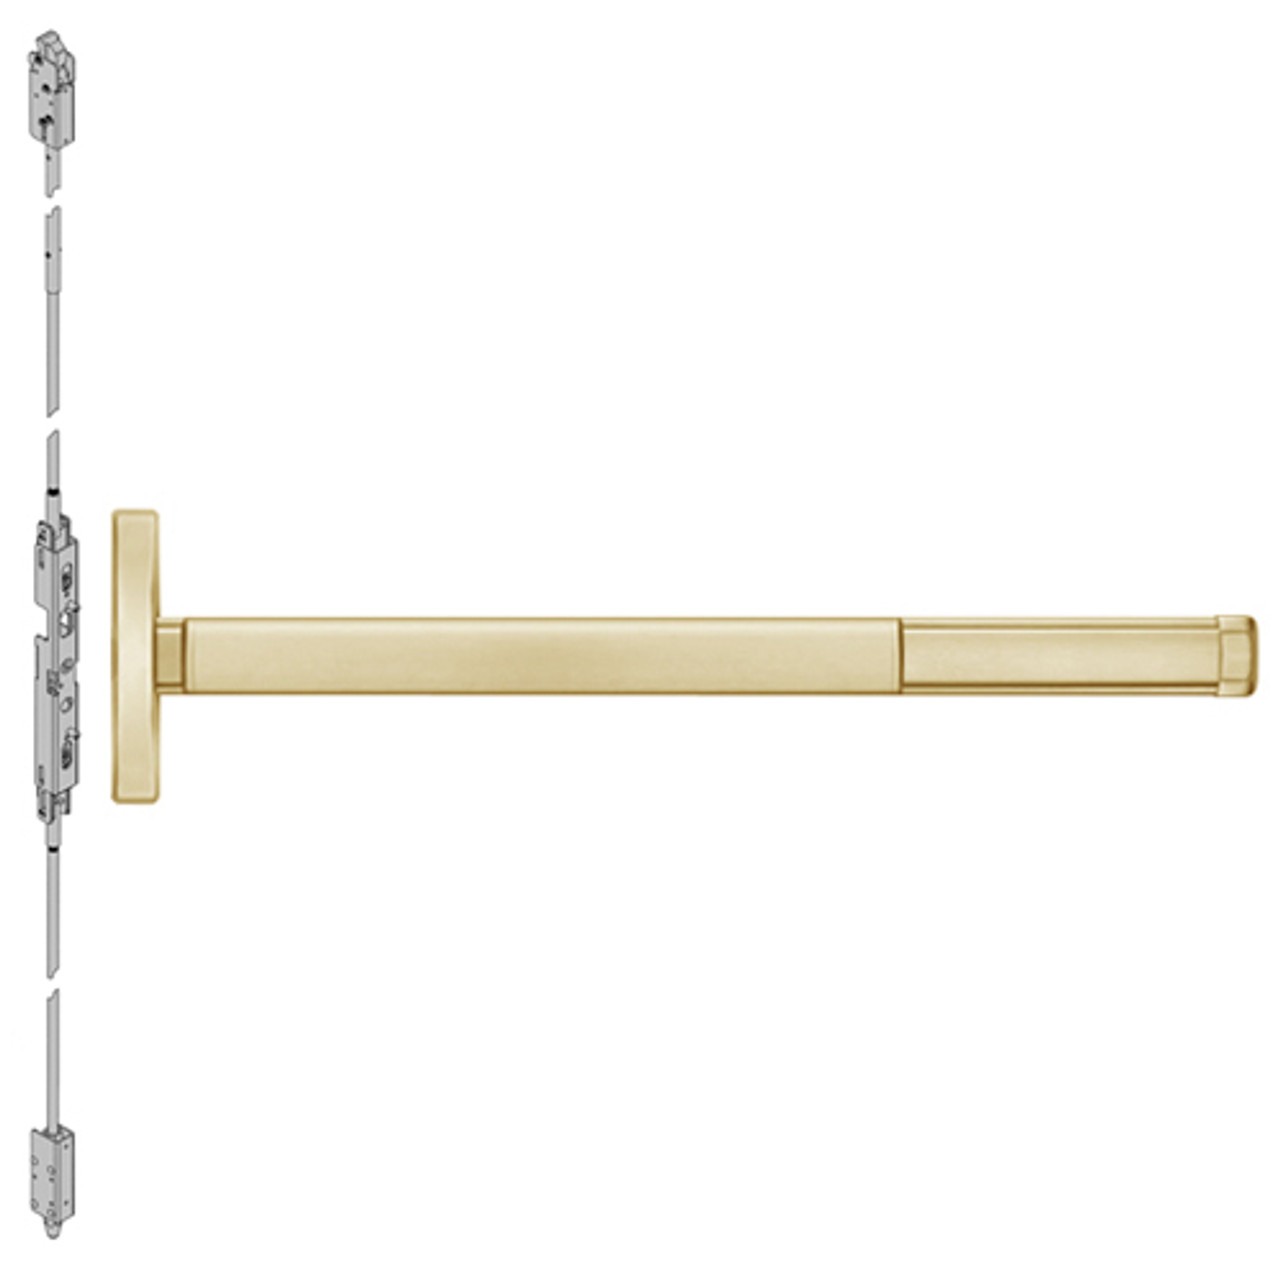 TS2603LBR-606-36 PHI 2600 Series Concealed Vertical Rod Exit Device with Touchbar Monitoring Switch Prepped for Key Retracts Latchbolt in Satin Brass Finish